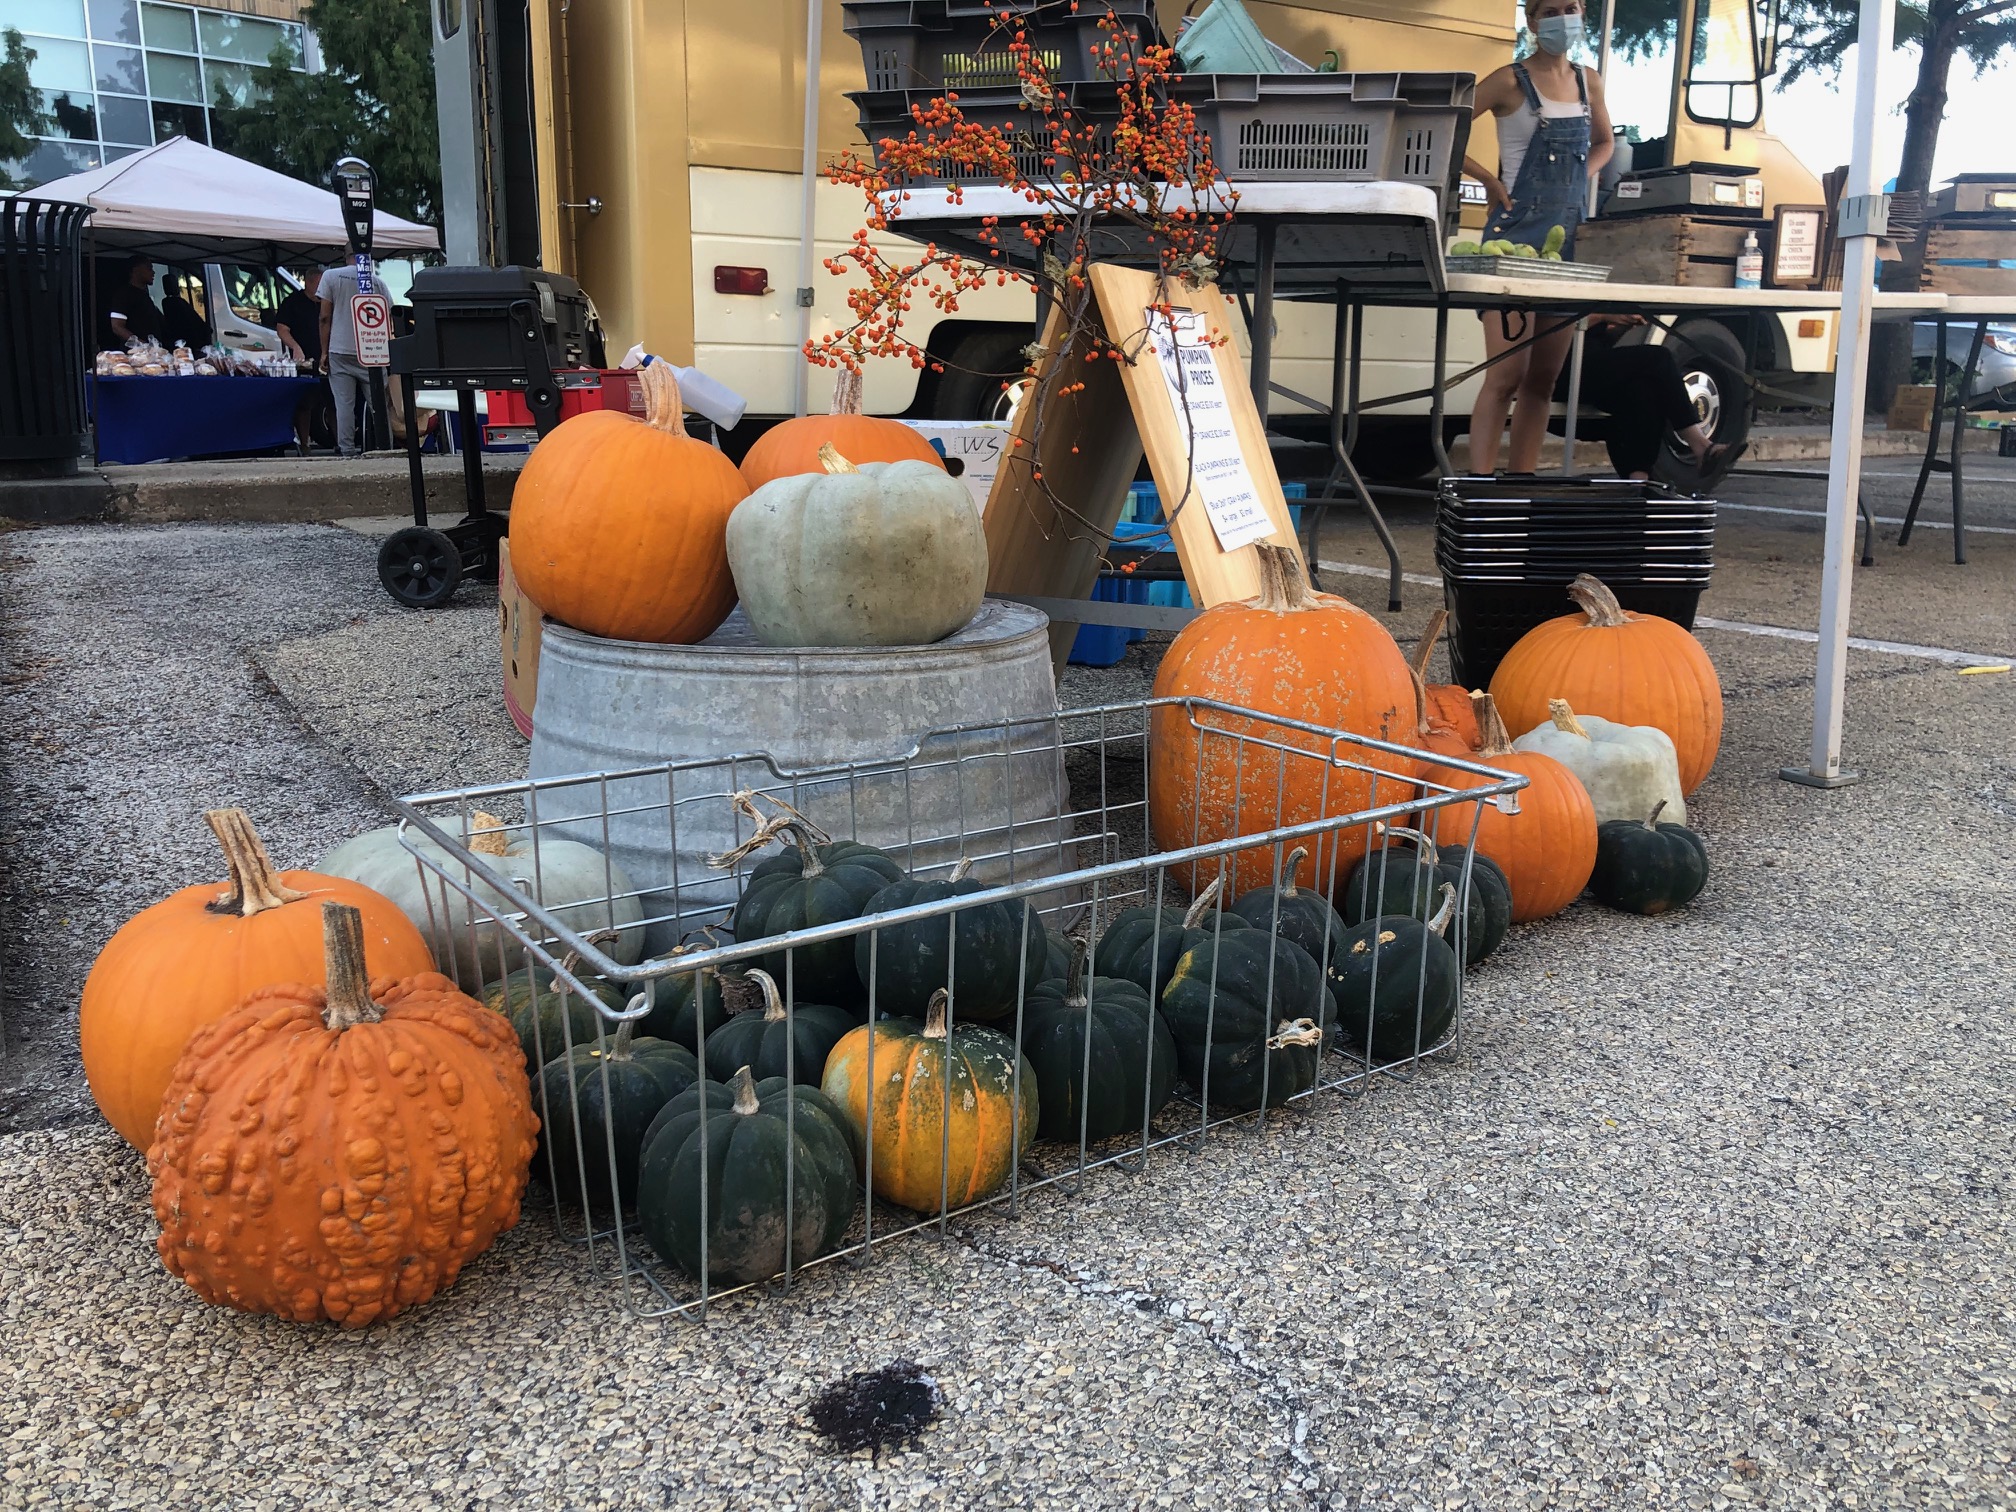 On the parking lot ground, there are large orange pumpkins beside a wire basket with smaller green pumpkins at the Champaign farmers' market. Photo by Alyssa Buckley.